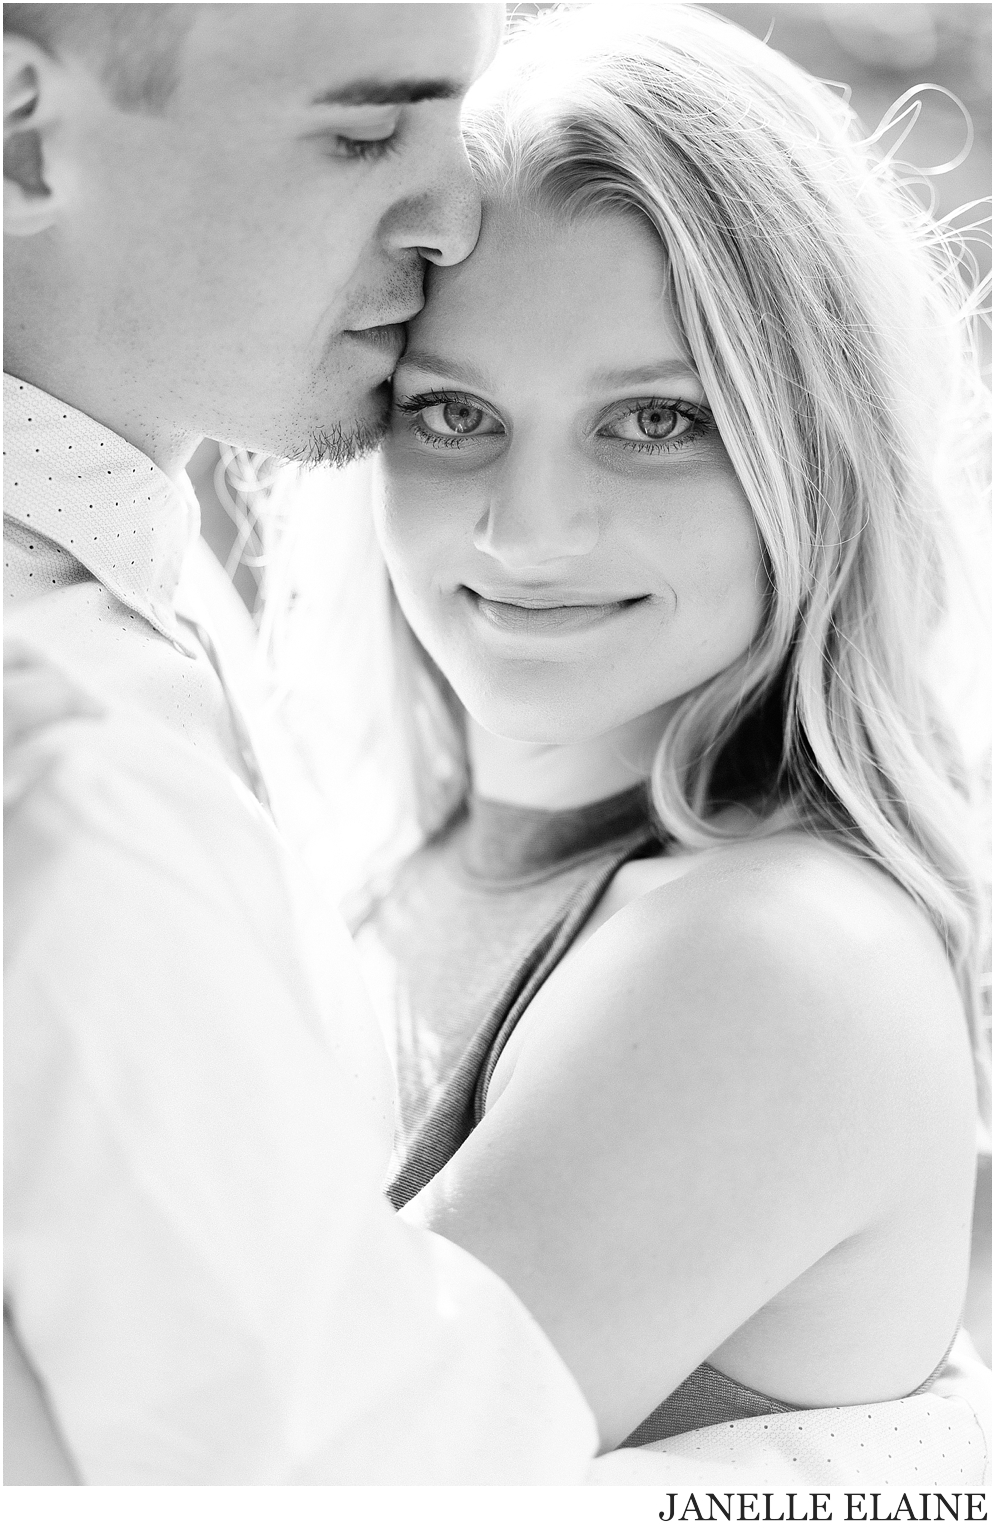 tricia and nate engagement photos-janelle elaine photography-31.jpg